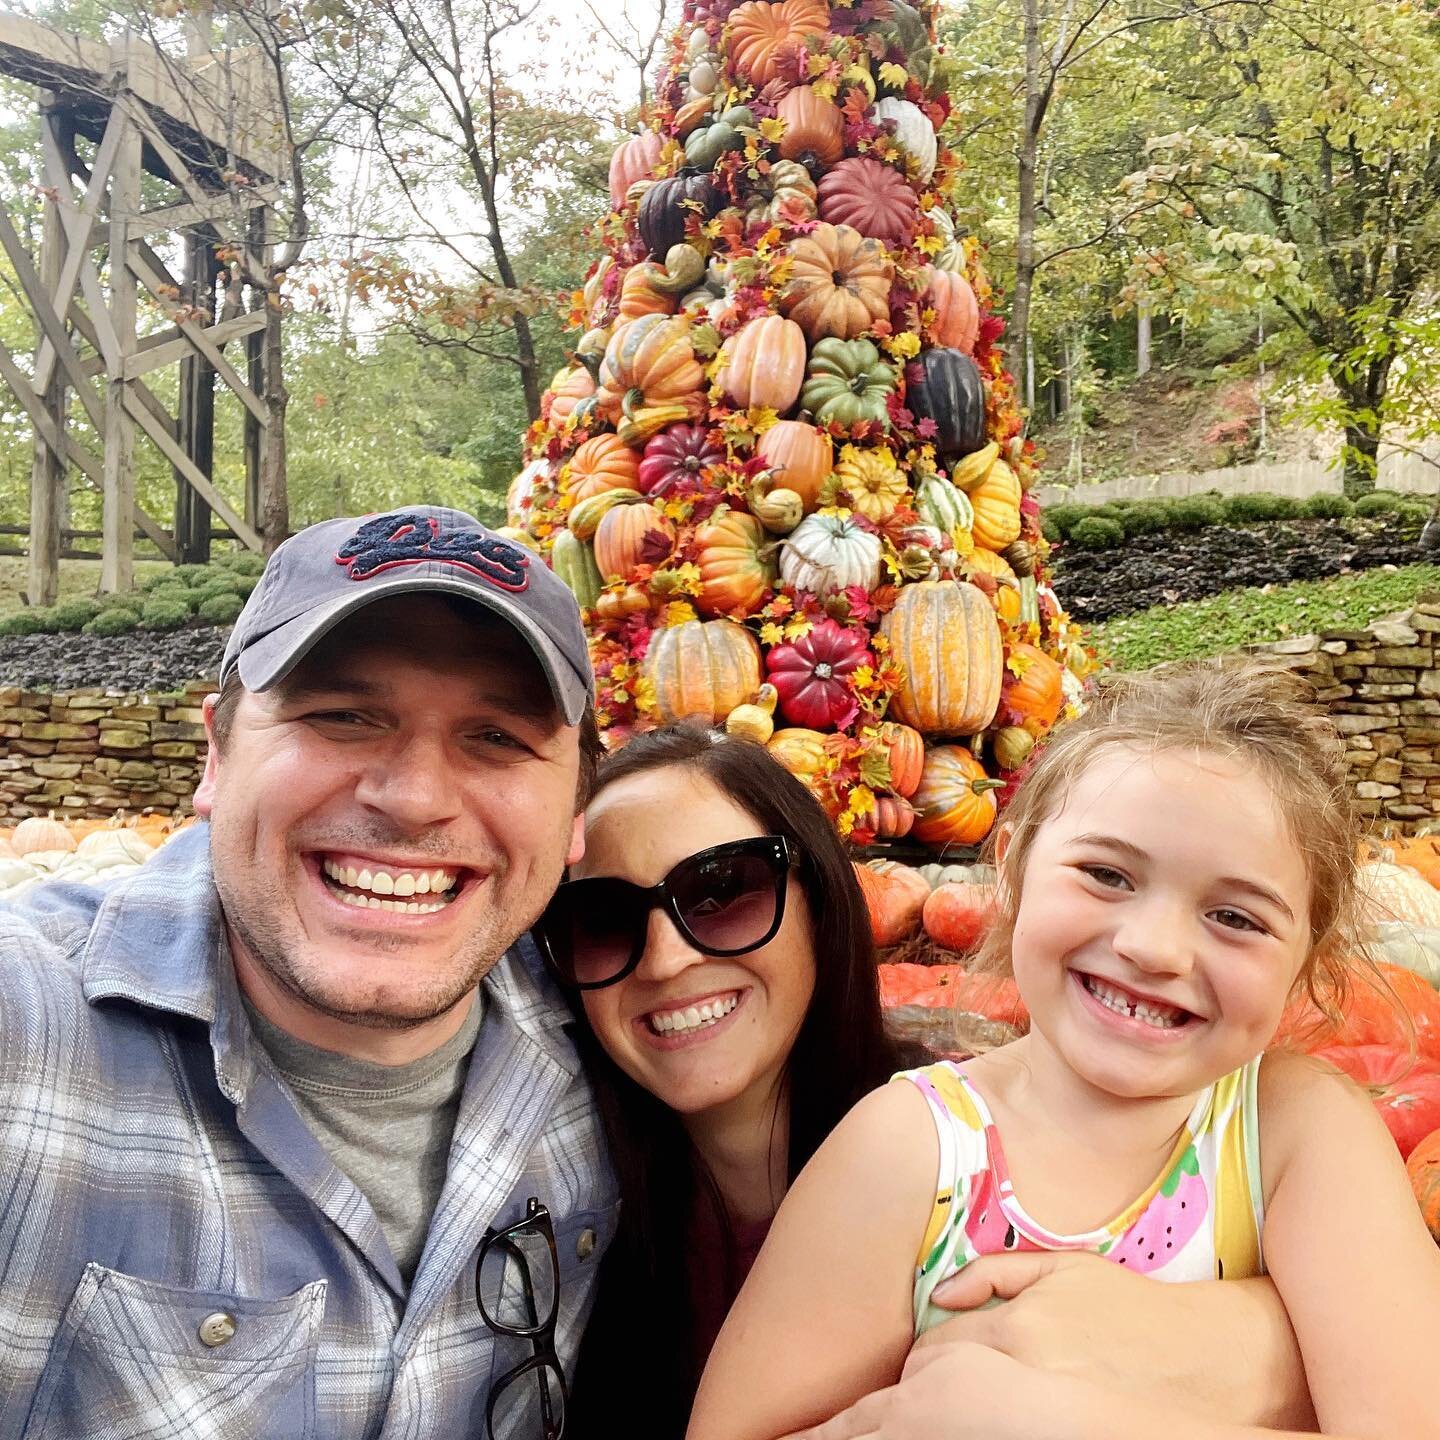 Dollywood&rsquo;s Harvest Festival and Great Pumpkin LumiNights never disappoints. 🎃✨ If you&rsquo;re in or within driving distance of the Pigeon Forge area in the next week you must go to @dollywood and take all your friends and family! I wrote a t